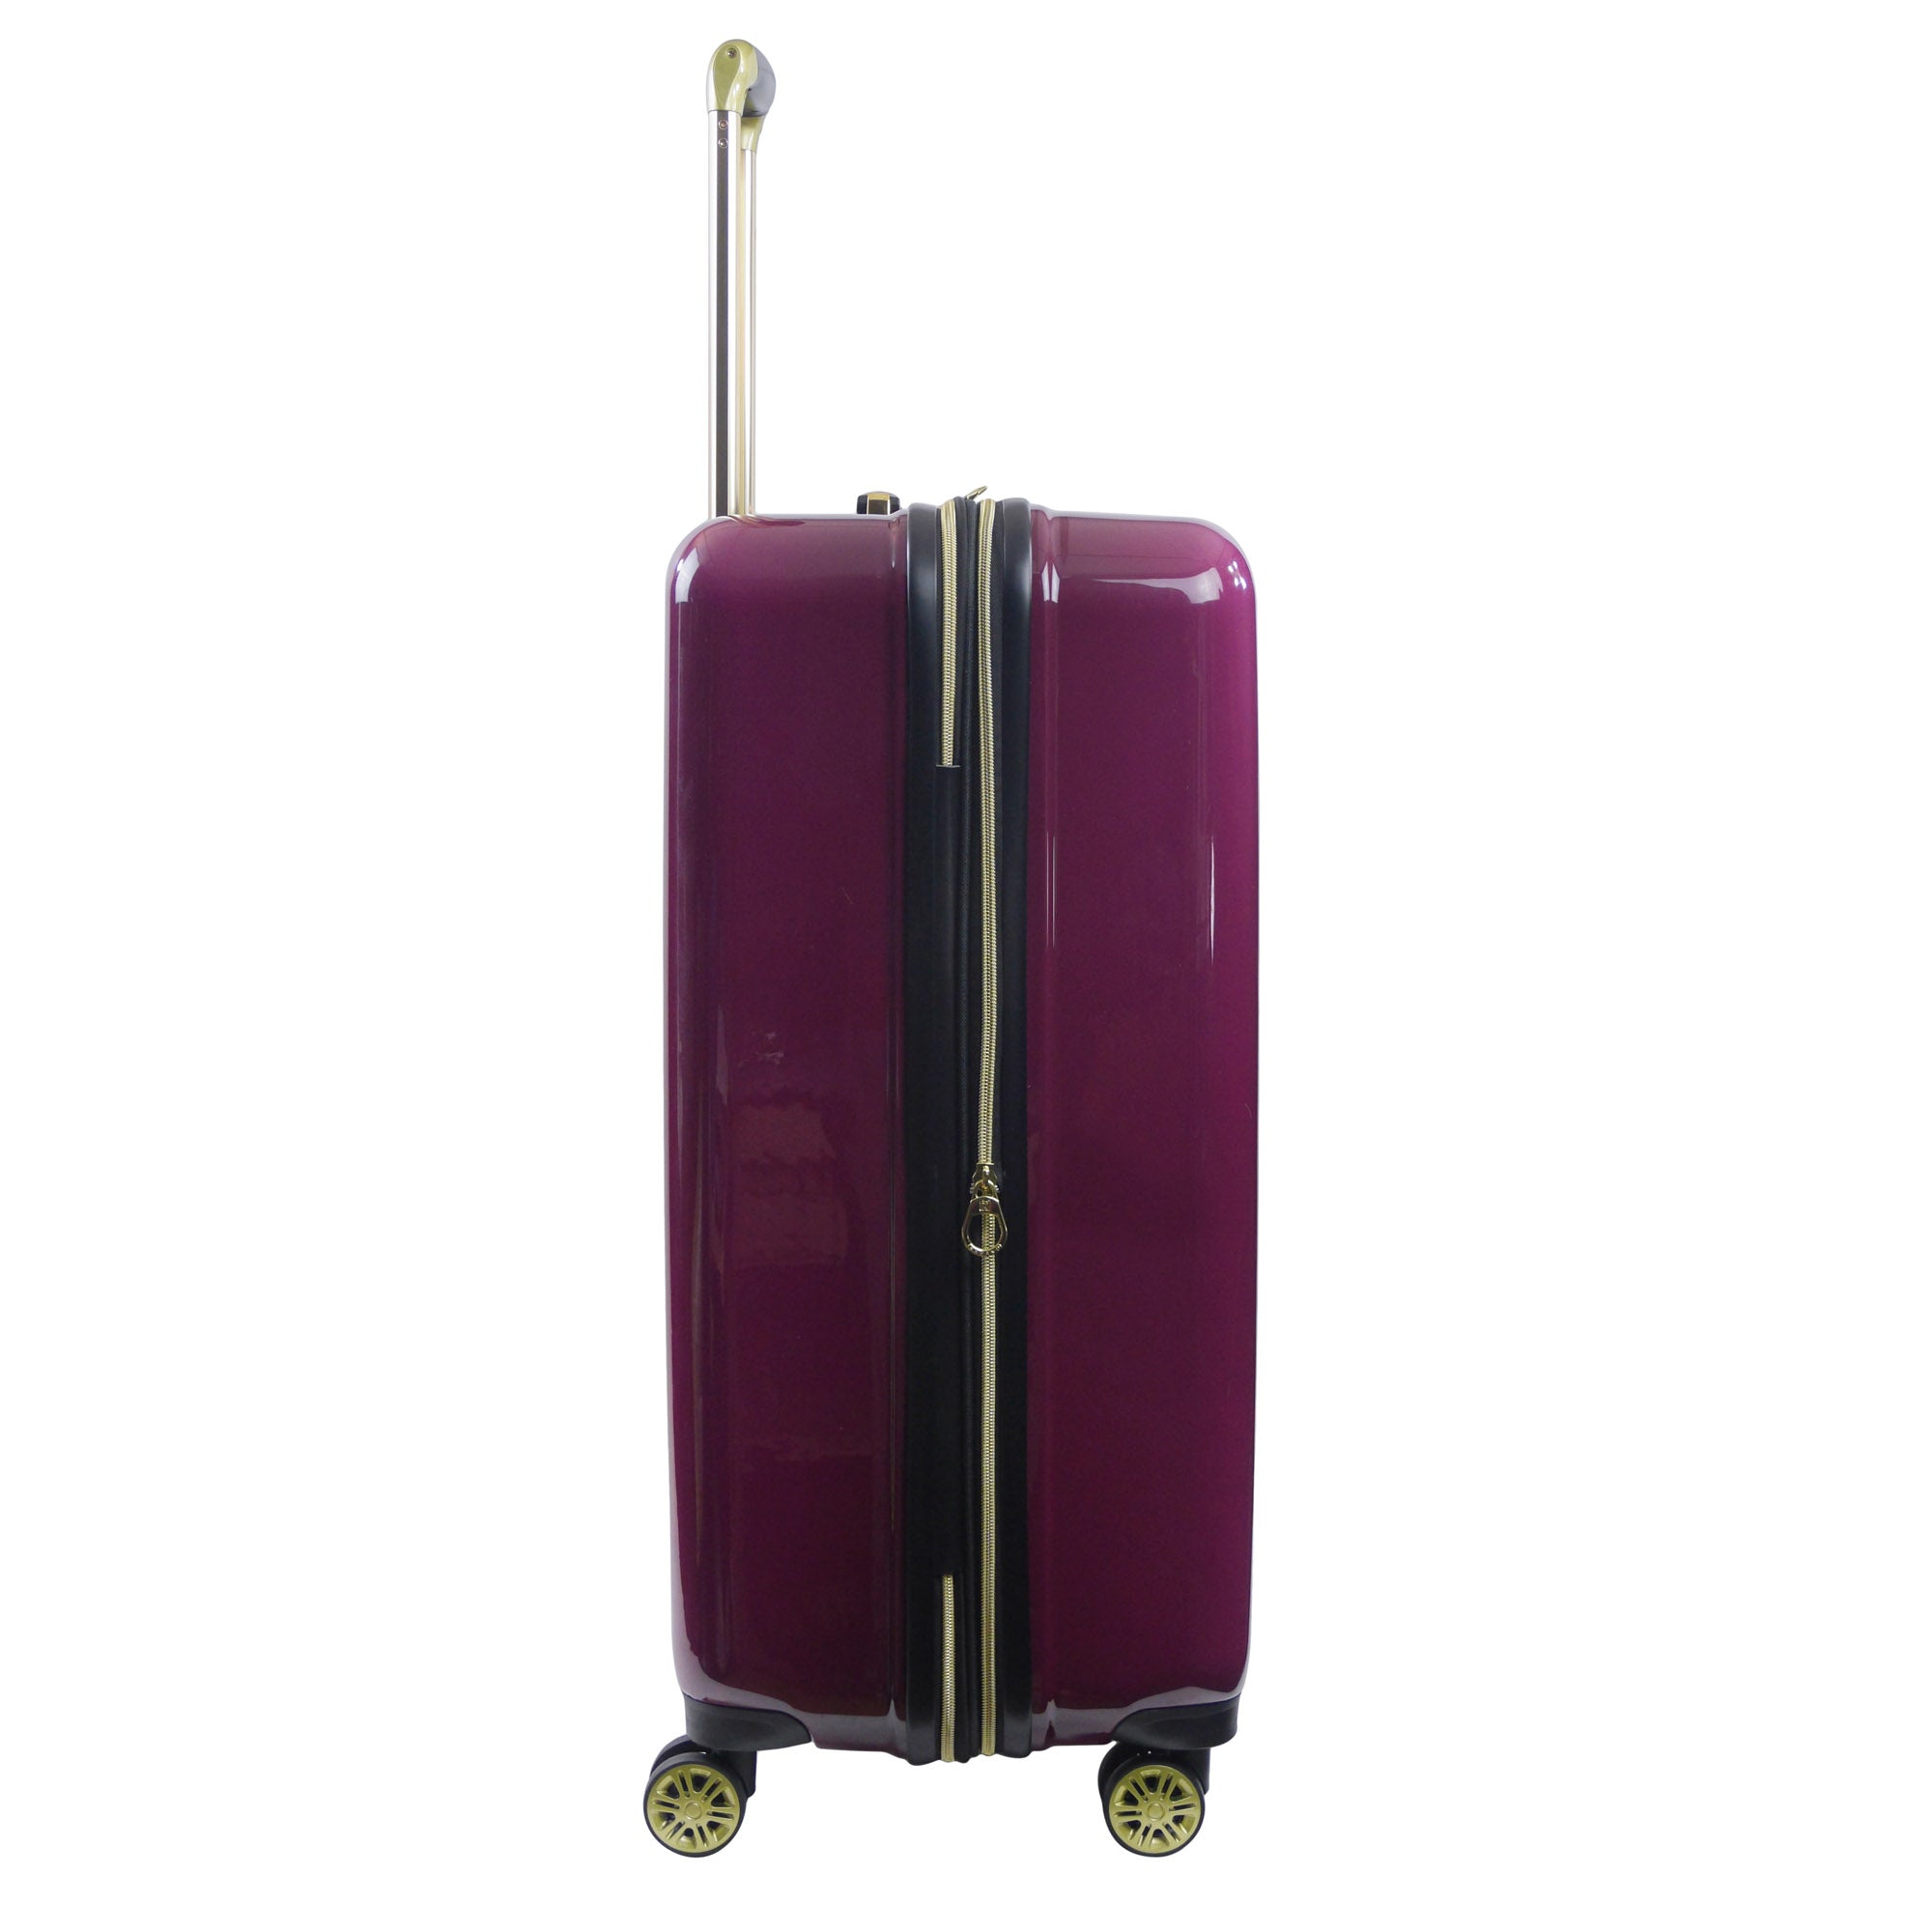 Harry Potter Hogwarts Express 29" spinner suitcase Luggage Burgundy a pull handle and 2 inches of expandable space -best spinner suitcase for traveling